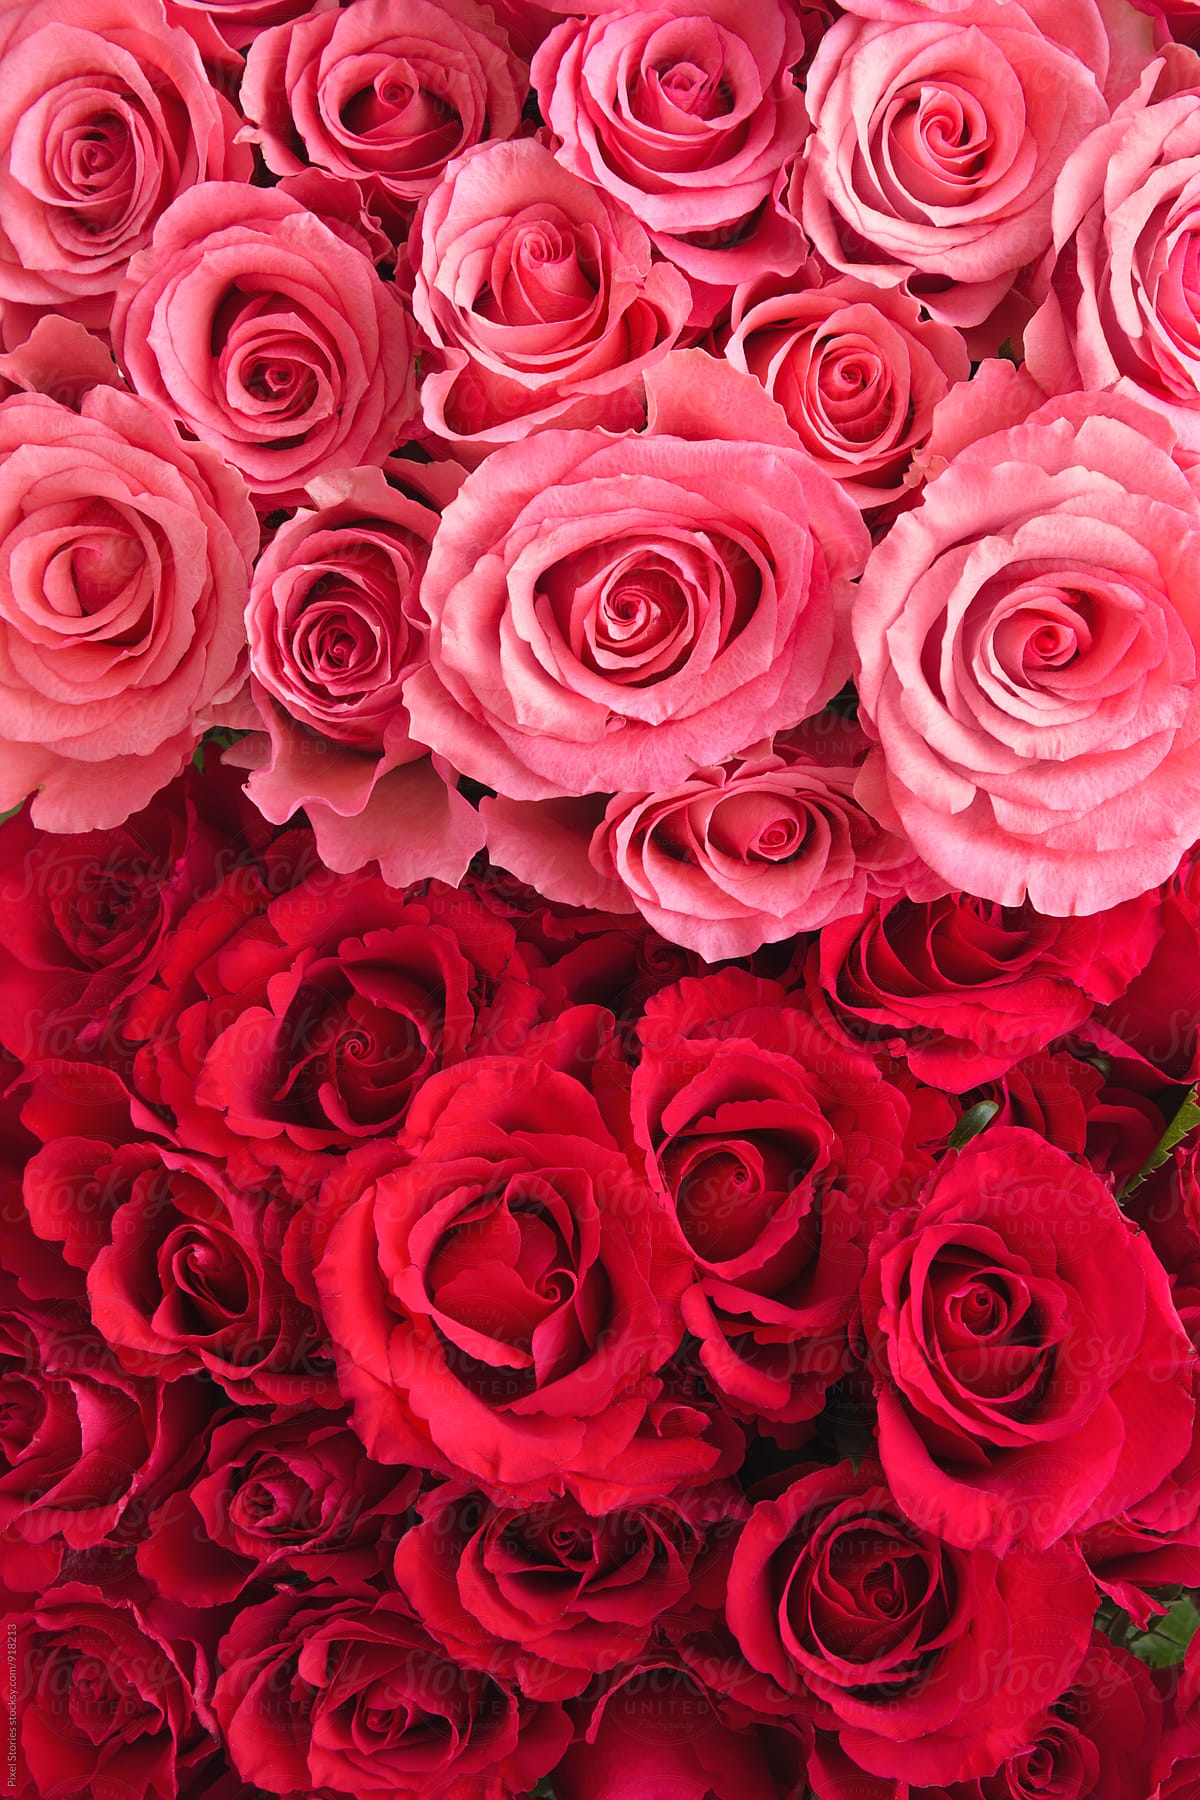 Pink And Red Roses Bouquet by Stocksy "Pixel Stories" - Stocksy